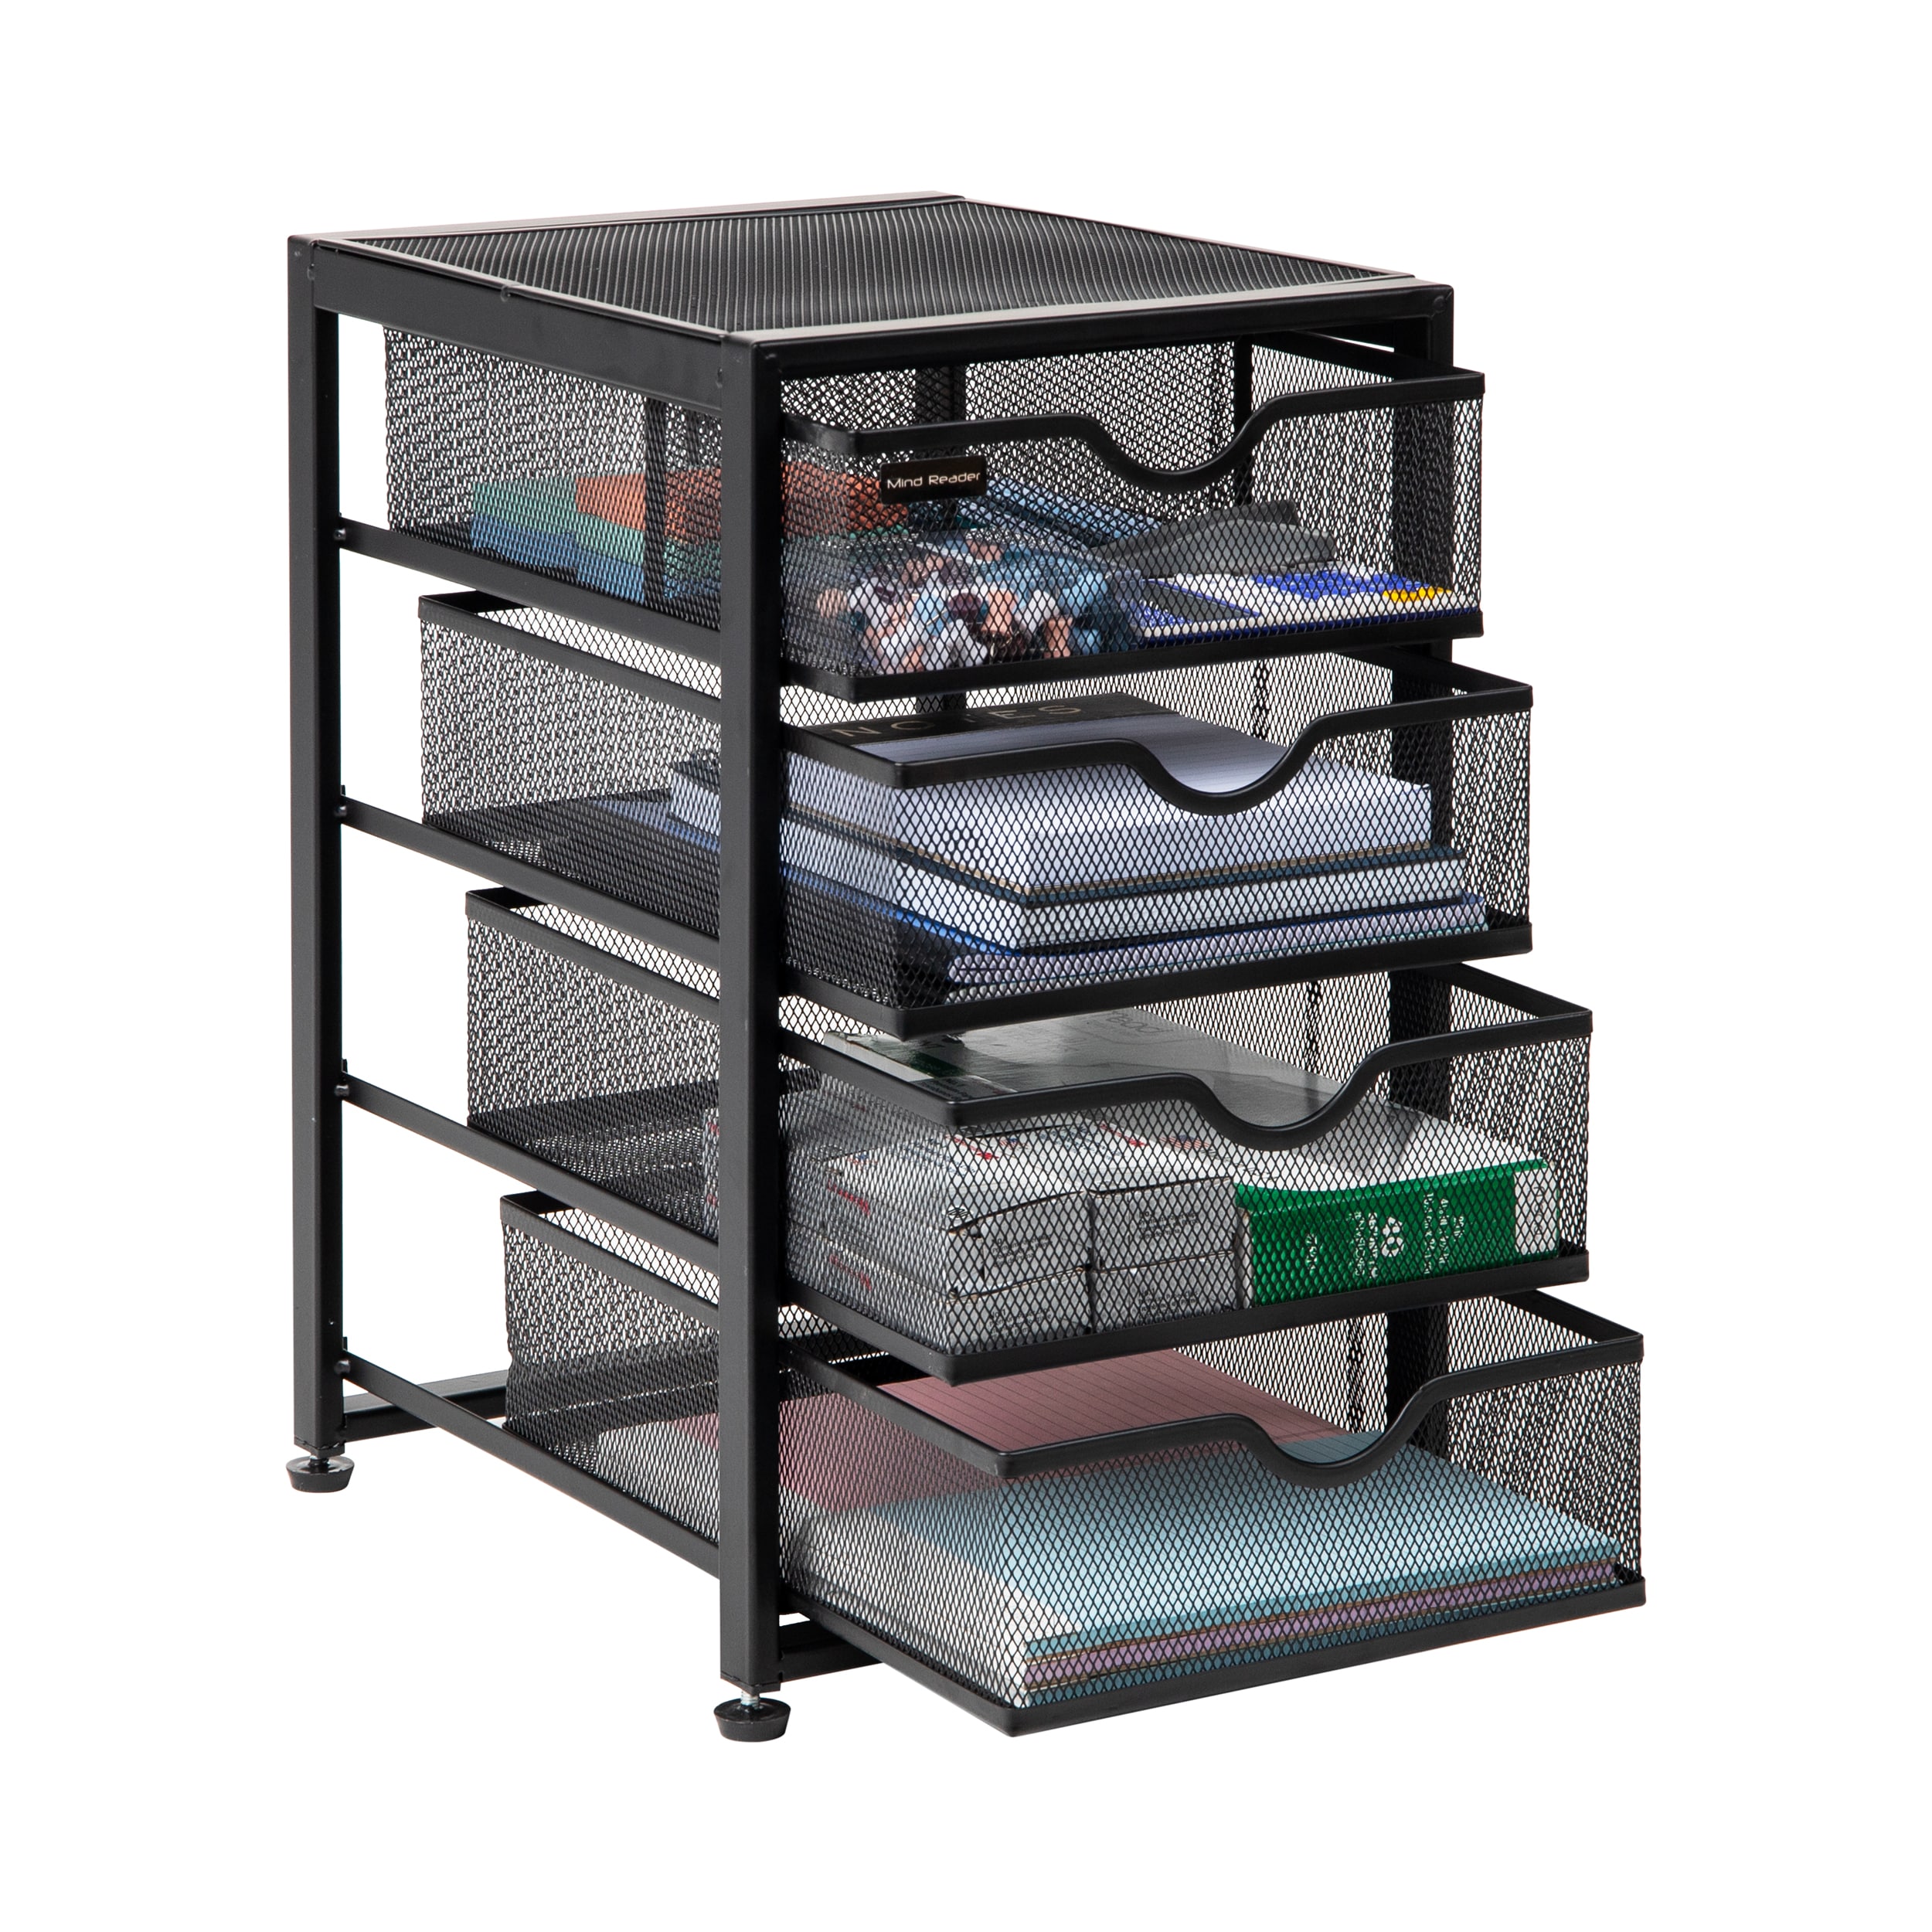 Rubbermaid 12-Compartment Desktop Organizer with Mesh Drawers - LD